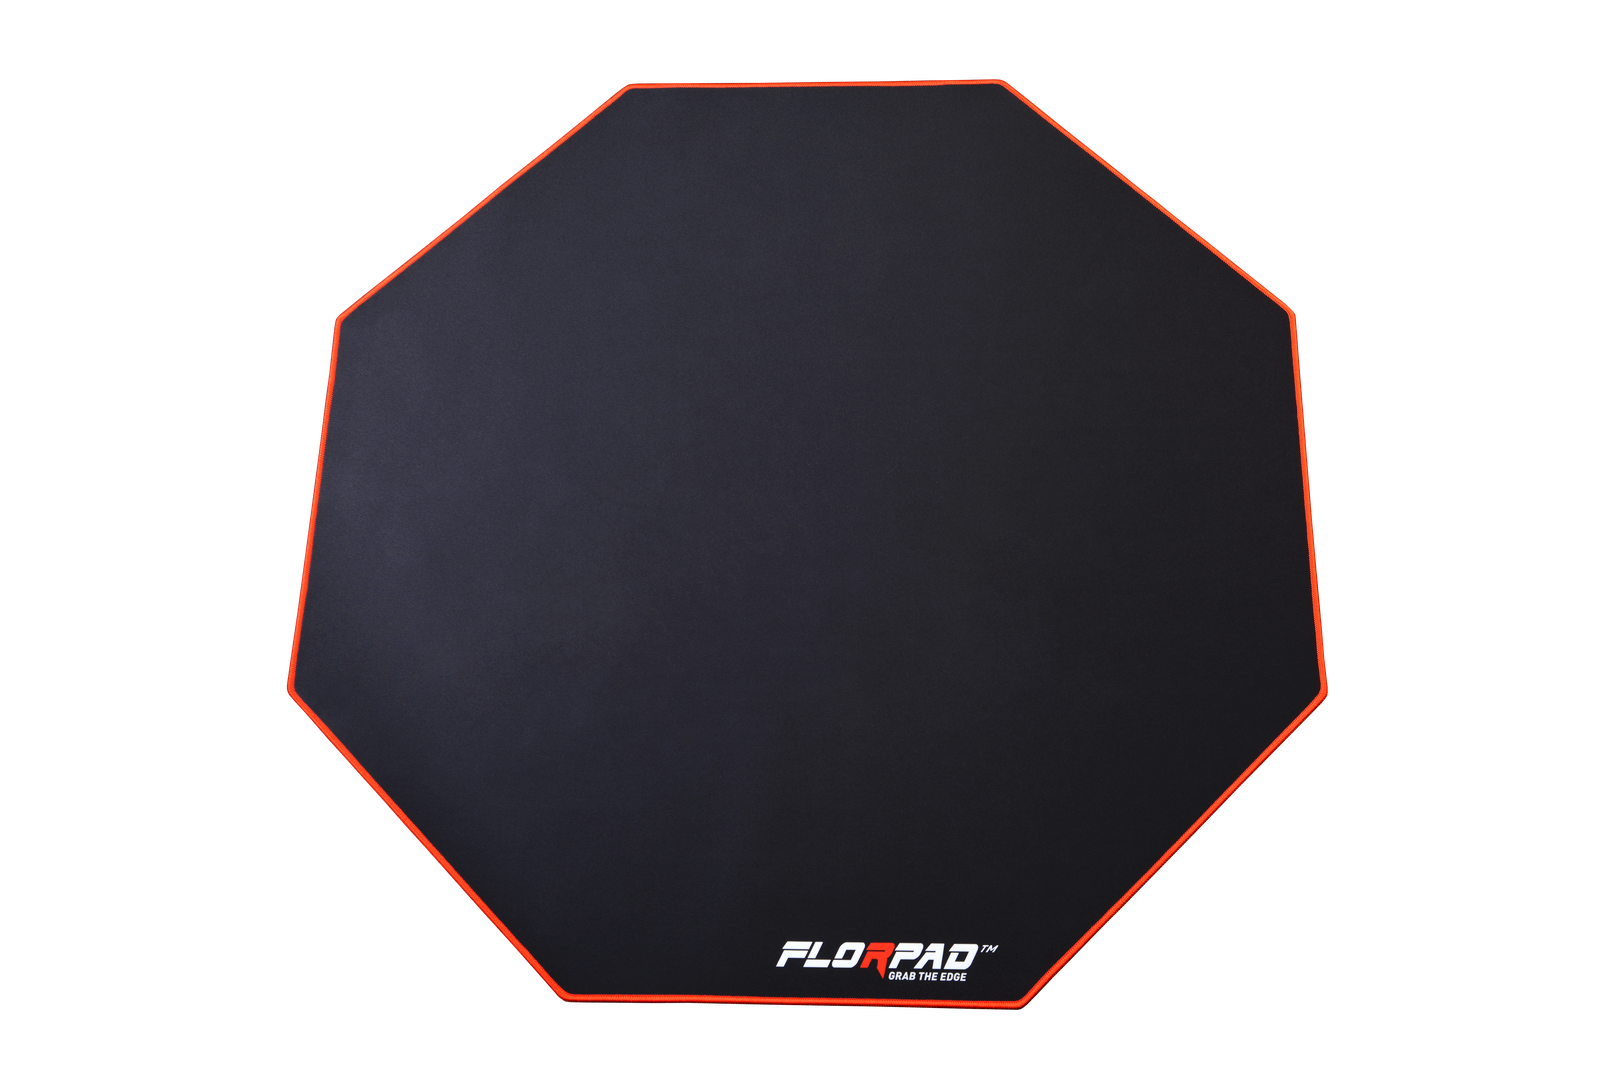 FLORPAD™ RED LINE